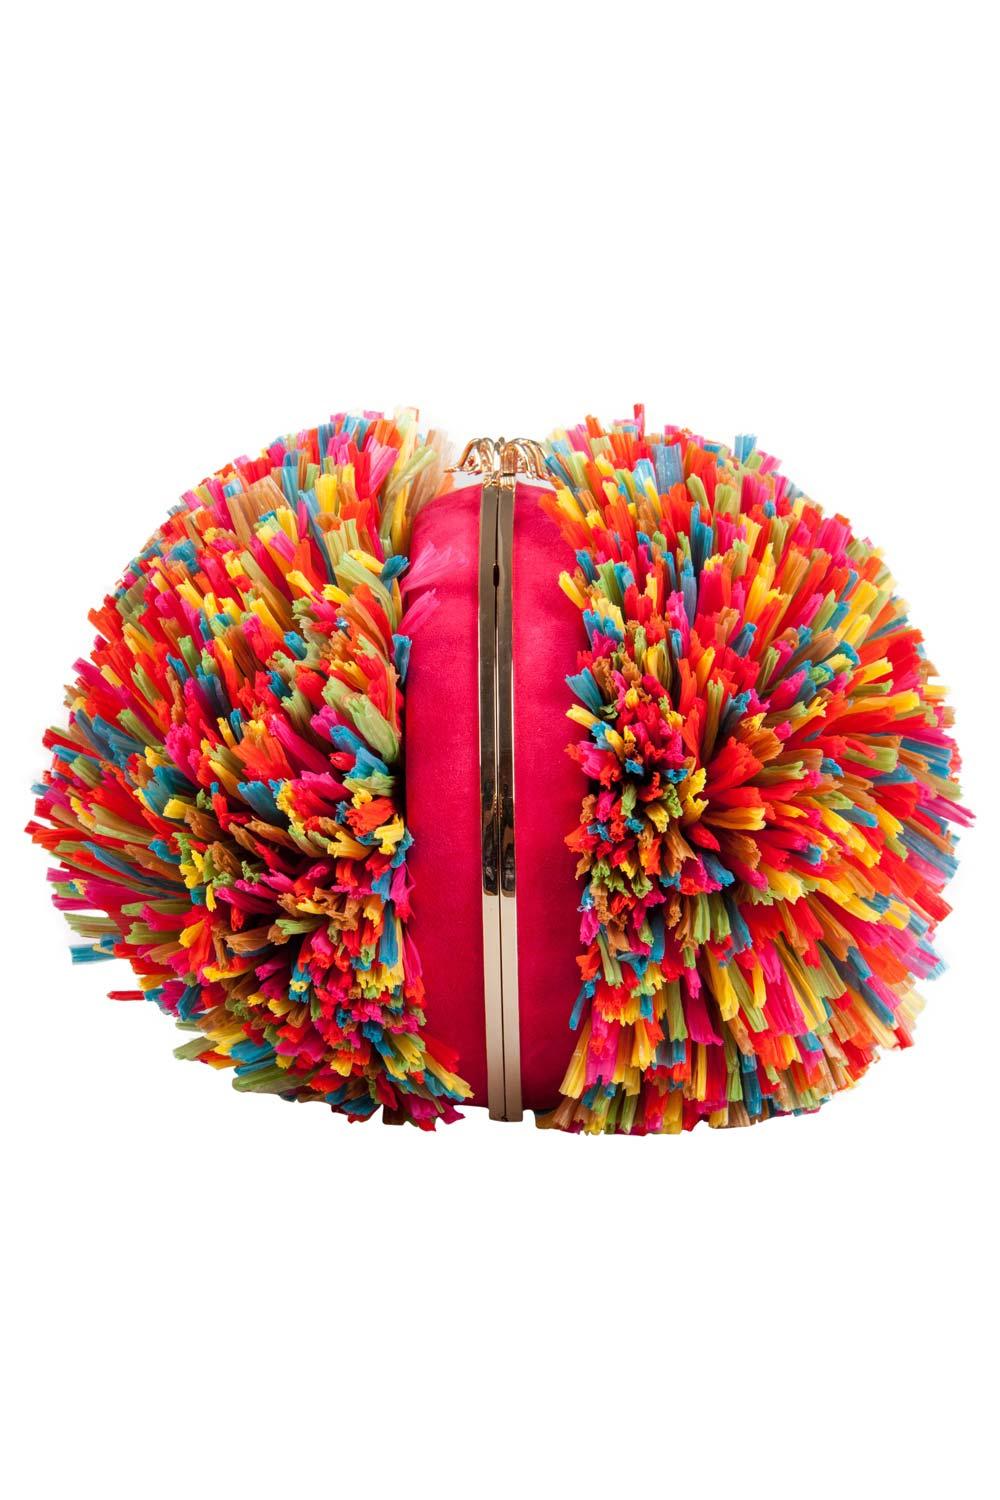 Embrace the fun and peppy side of you with this chic, fun and eye-catching Charlotte Olympia Fiesta clutch bag. It is designed with satin and multicolors straws creating an intriguing silhouette. It features a long chain-link shoulder strap and an